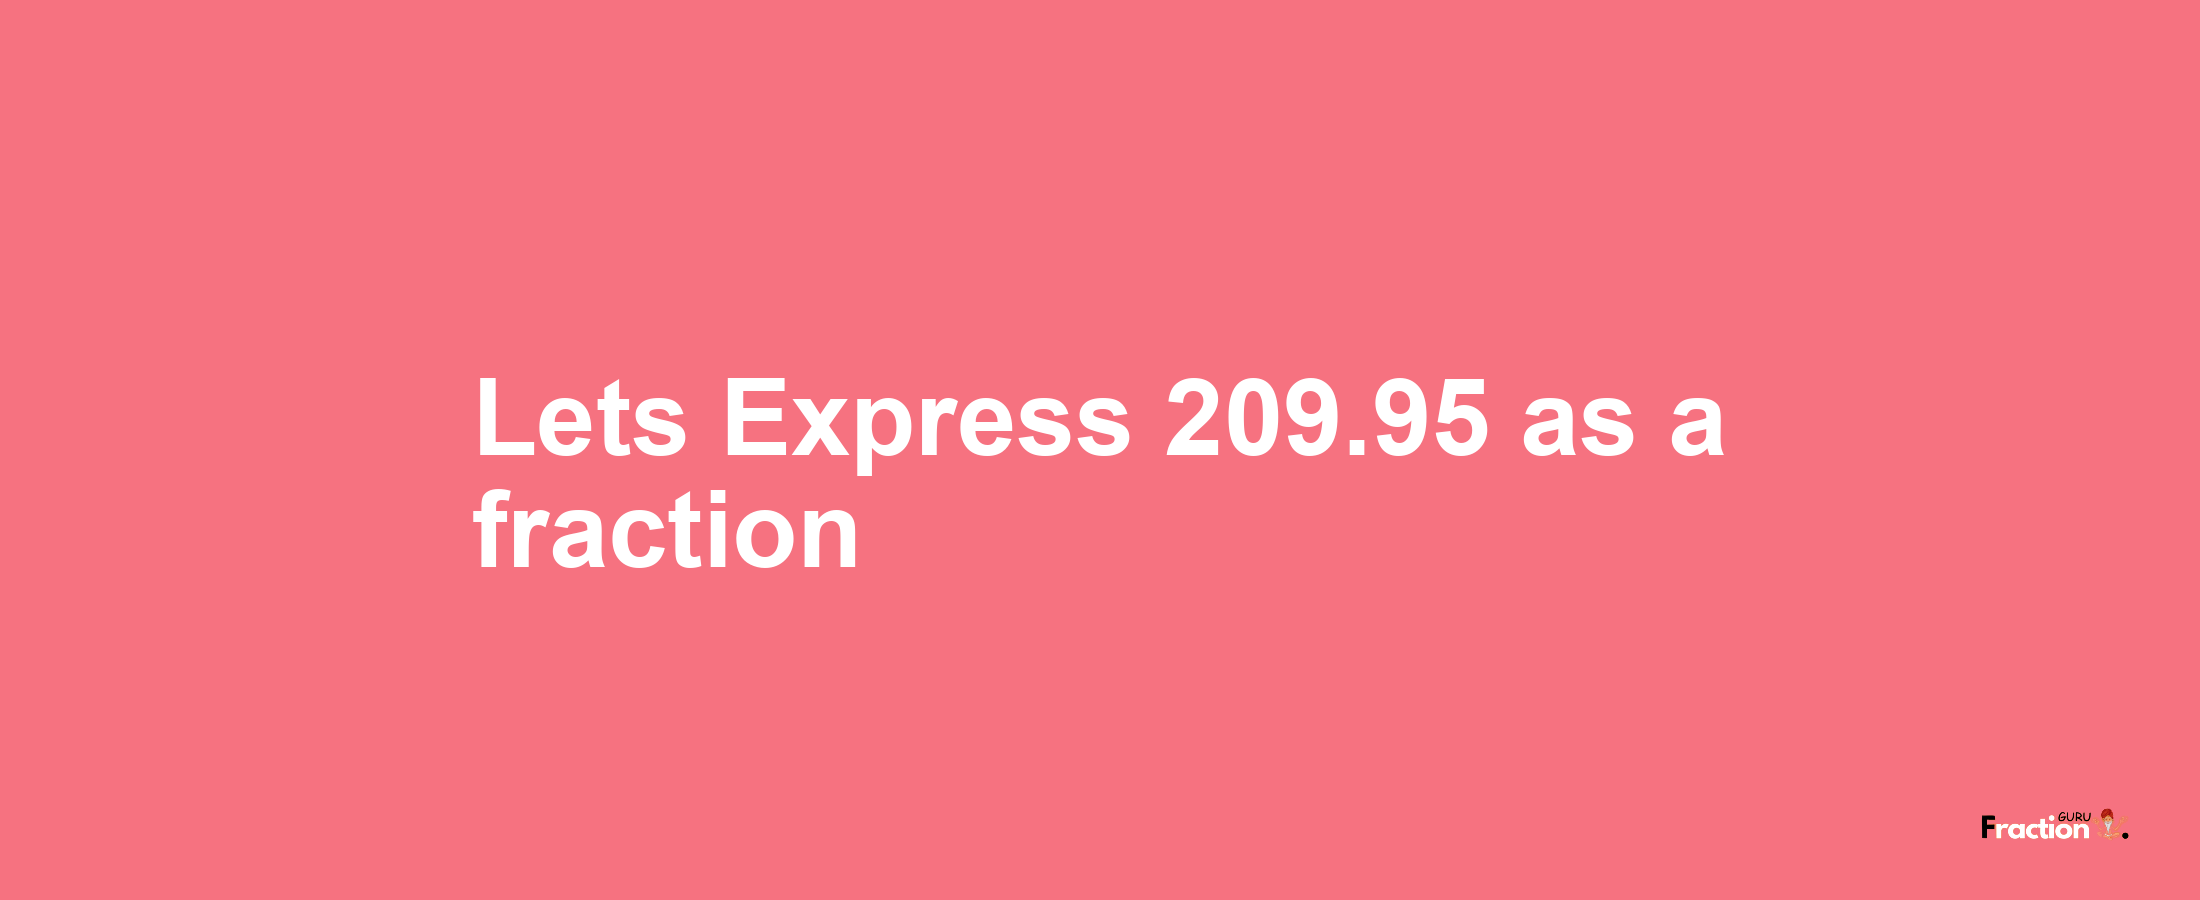 Lets Express 209.95 as afraction